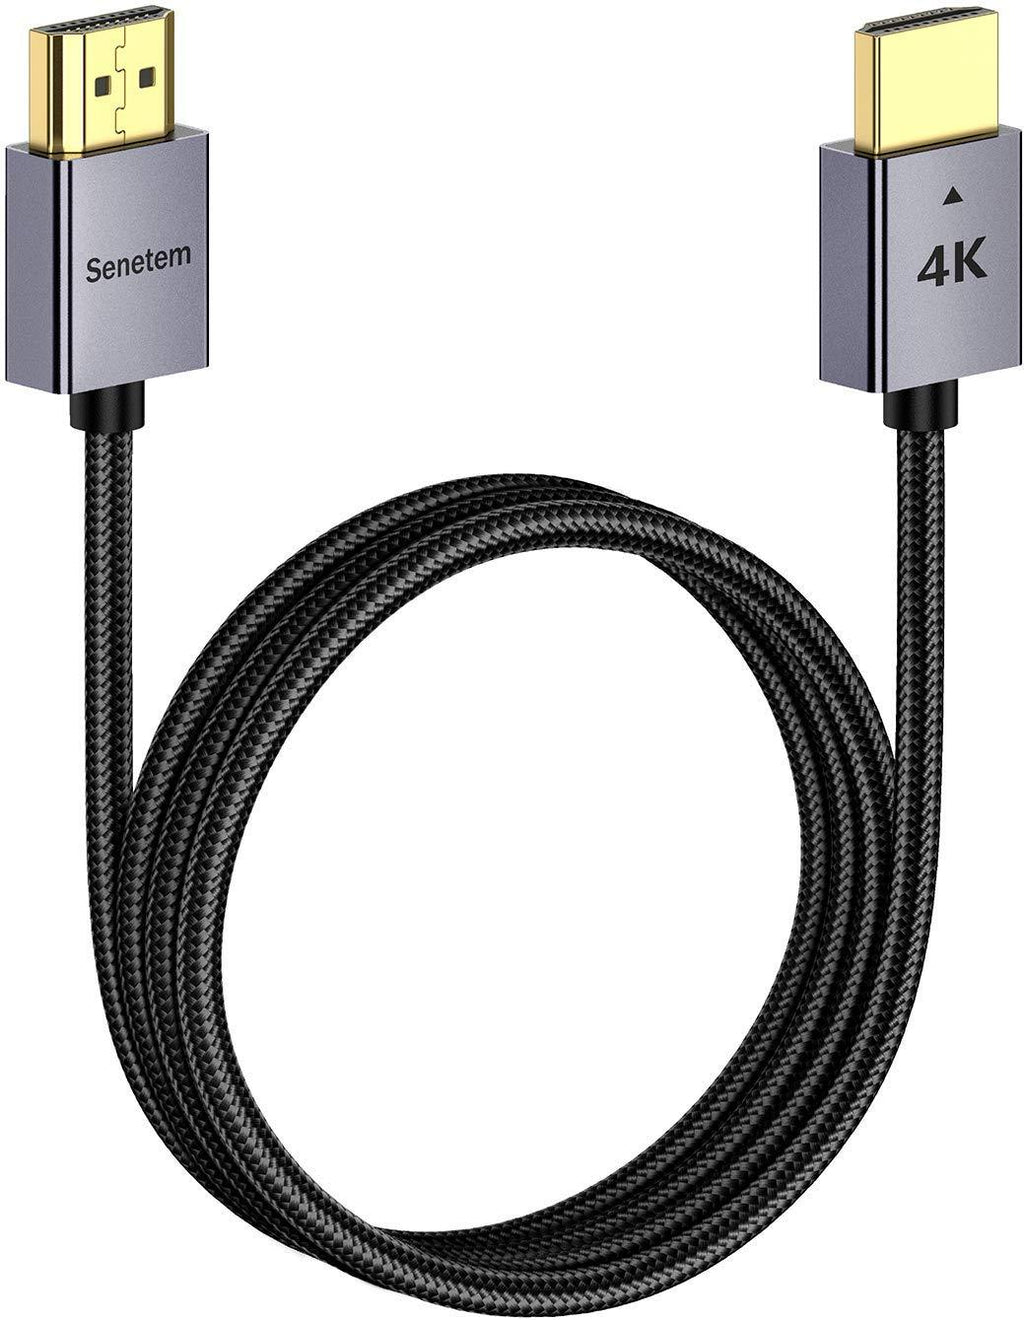 4K HDMI Cable 6.6 ft High Speed (4K@60Hz, 18Gbps), HDMI 2.0 Cord, Cotton Braided, Slim Aluminum Shell, Gold-Plated Connectors -4K HDR, ARC, for Gaming Monitor, TV, X-Box, PS5/4/3 (6.6 Feet, Braided) 6.6 Feet